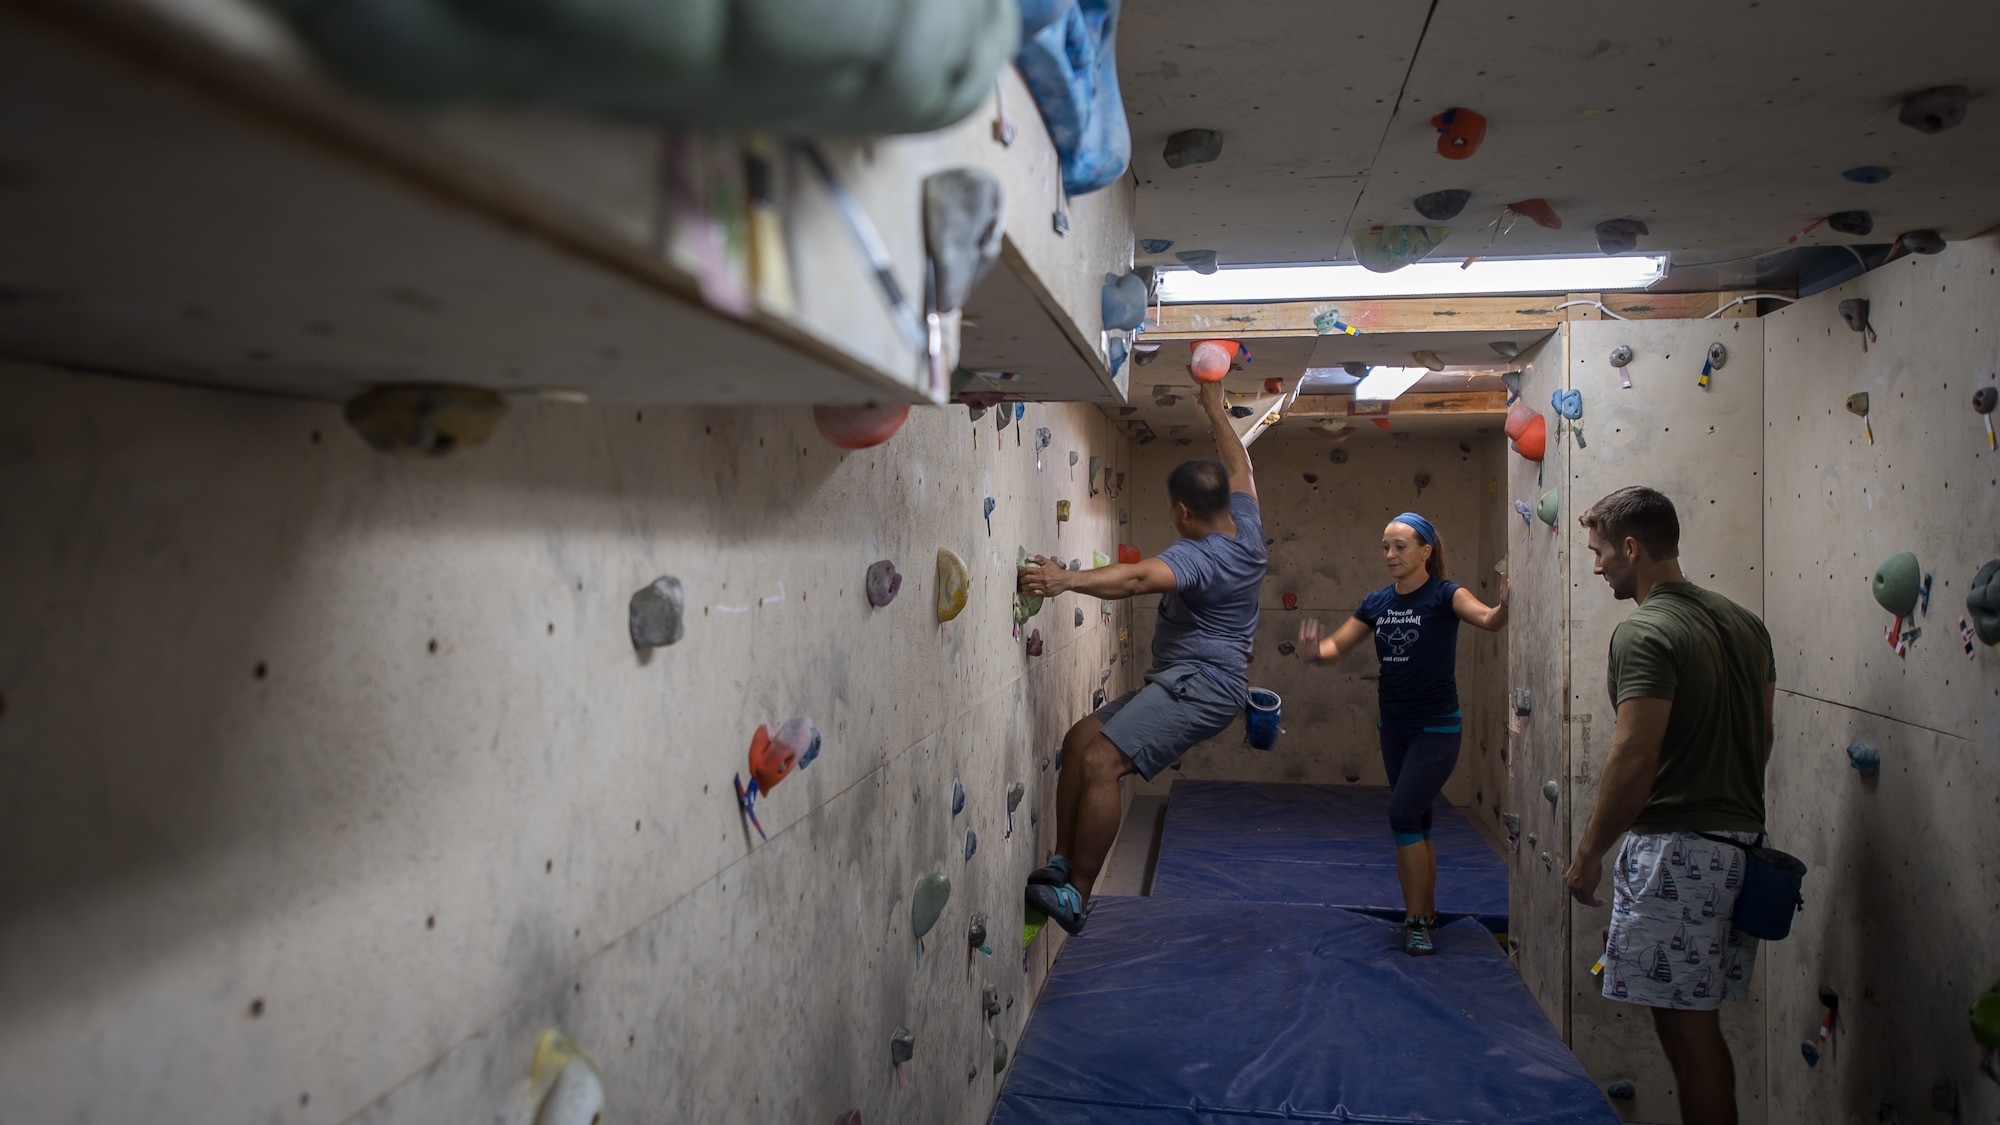 U.S. Air Force Maj. Breanna Gawrys (center), 386th Expeditionary Medical Group physician, and 1st Lt. Luke Russell (right), 386th EMDG physician’s assistant, help guide a gym patron as he climbs the bouldering wall near the Flex Gym on Ali Al Salem Air Base, Kuwait, June 30, 2019. Gawrys and Russell worked together to renovate the wall and provide an additional fitness option for ASAB personnel. (U.S. Air Force photo by Tech. Sgt. Daniel Martinez)